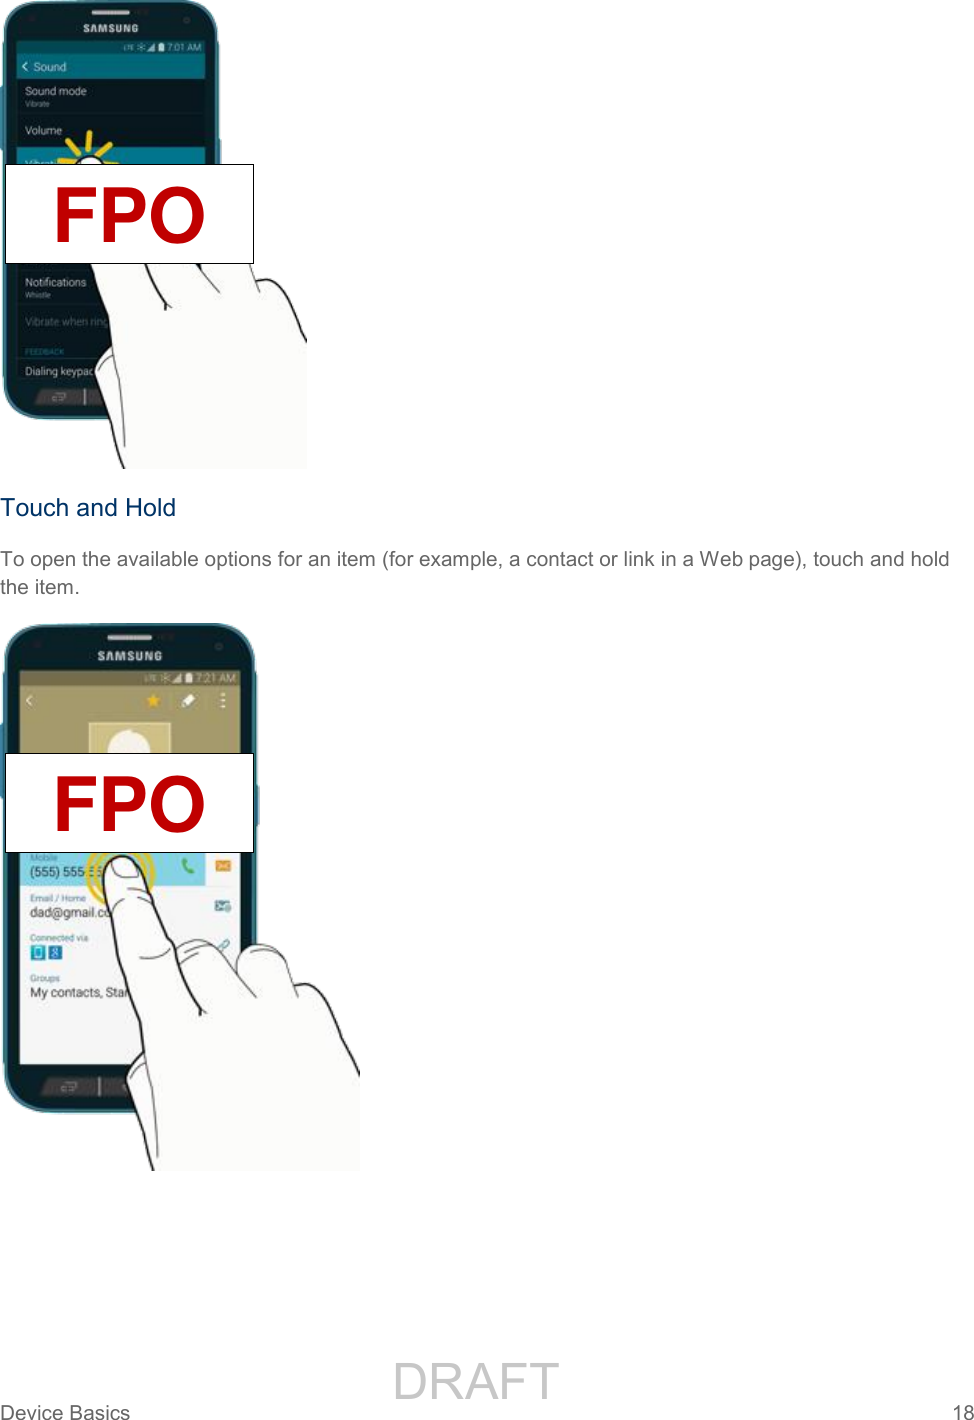                 DRAFT FOR INTERNAL USE ONLYDevice Basics  18    Touch and Hold To open the available options for an item (for example, a contact or link in a Web page), touch and hold the item.  FPO FPO 